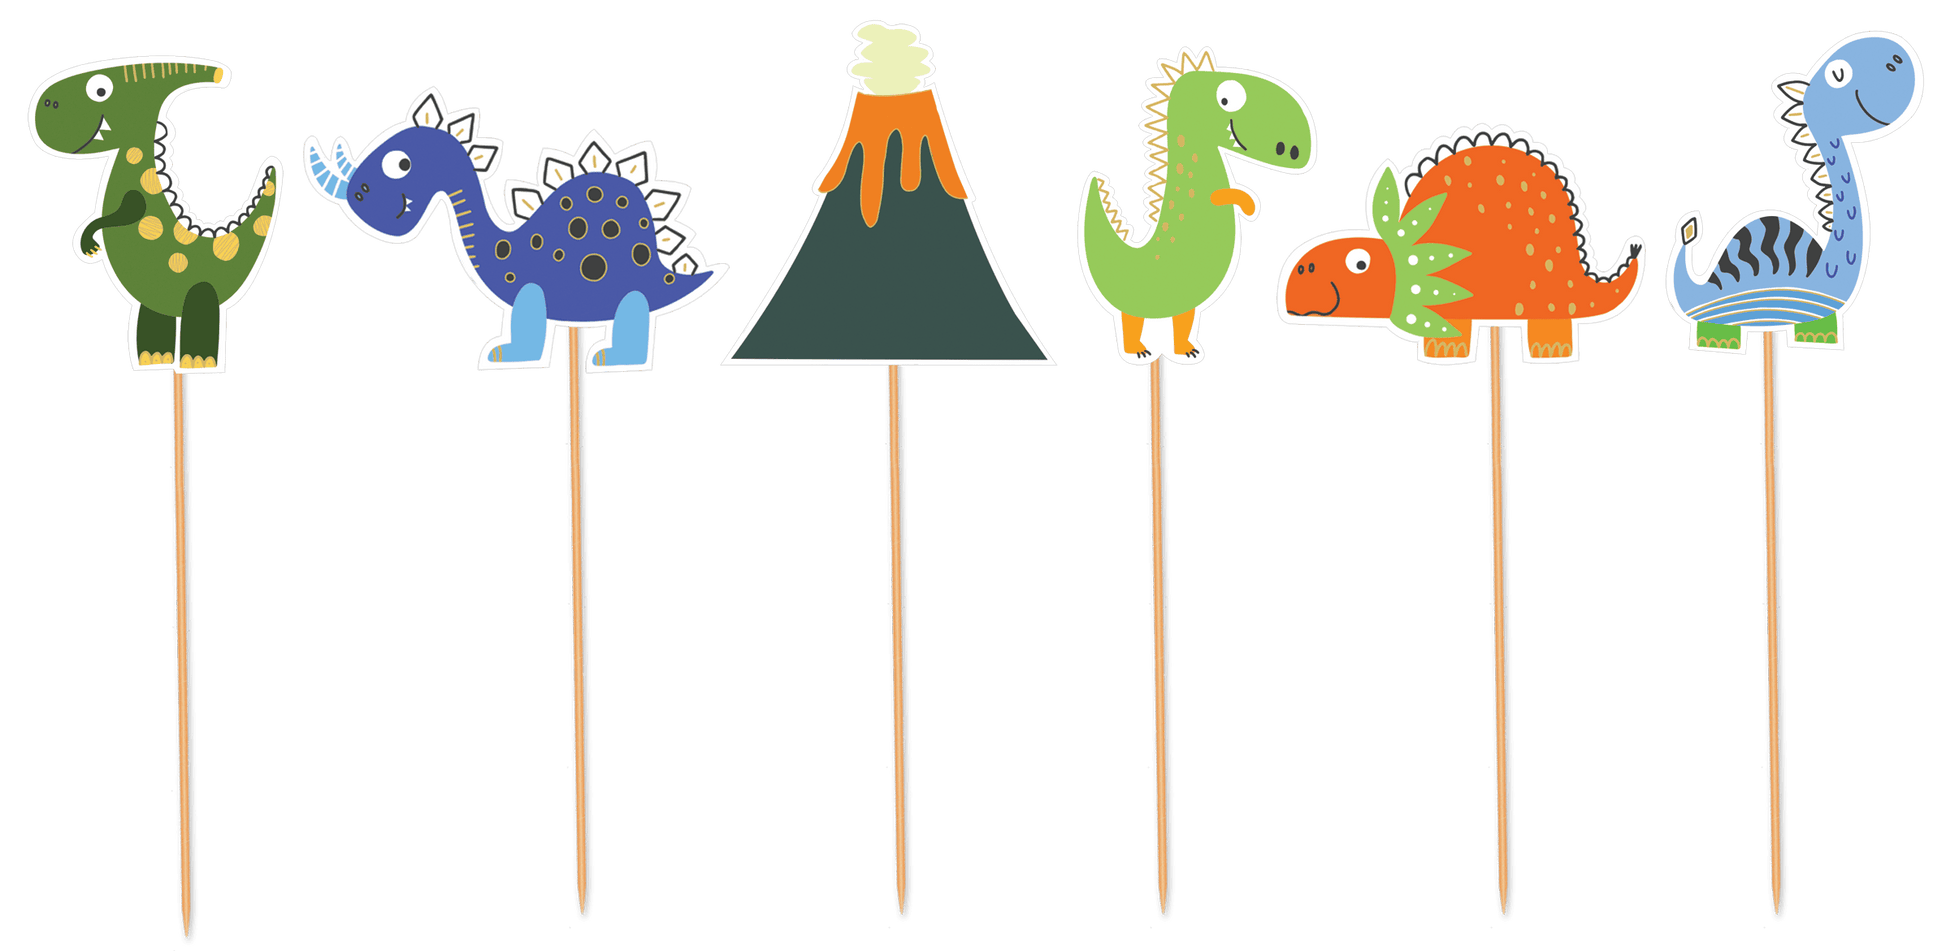 Dinosaurs Cake Toppers - Shelburne Country Store